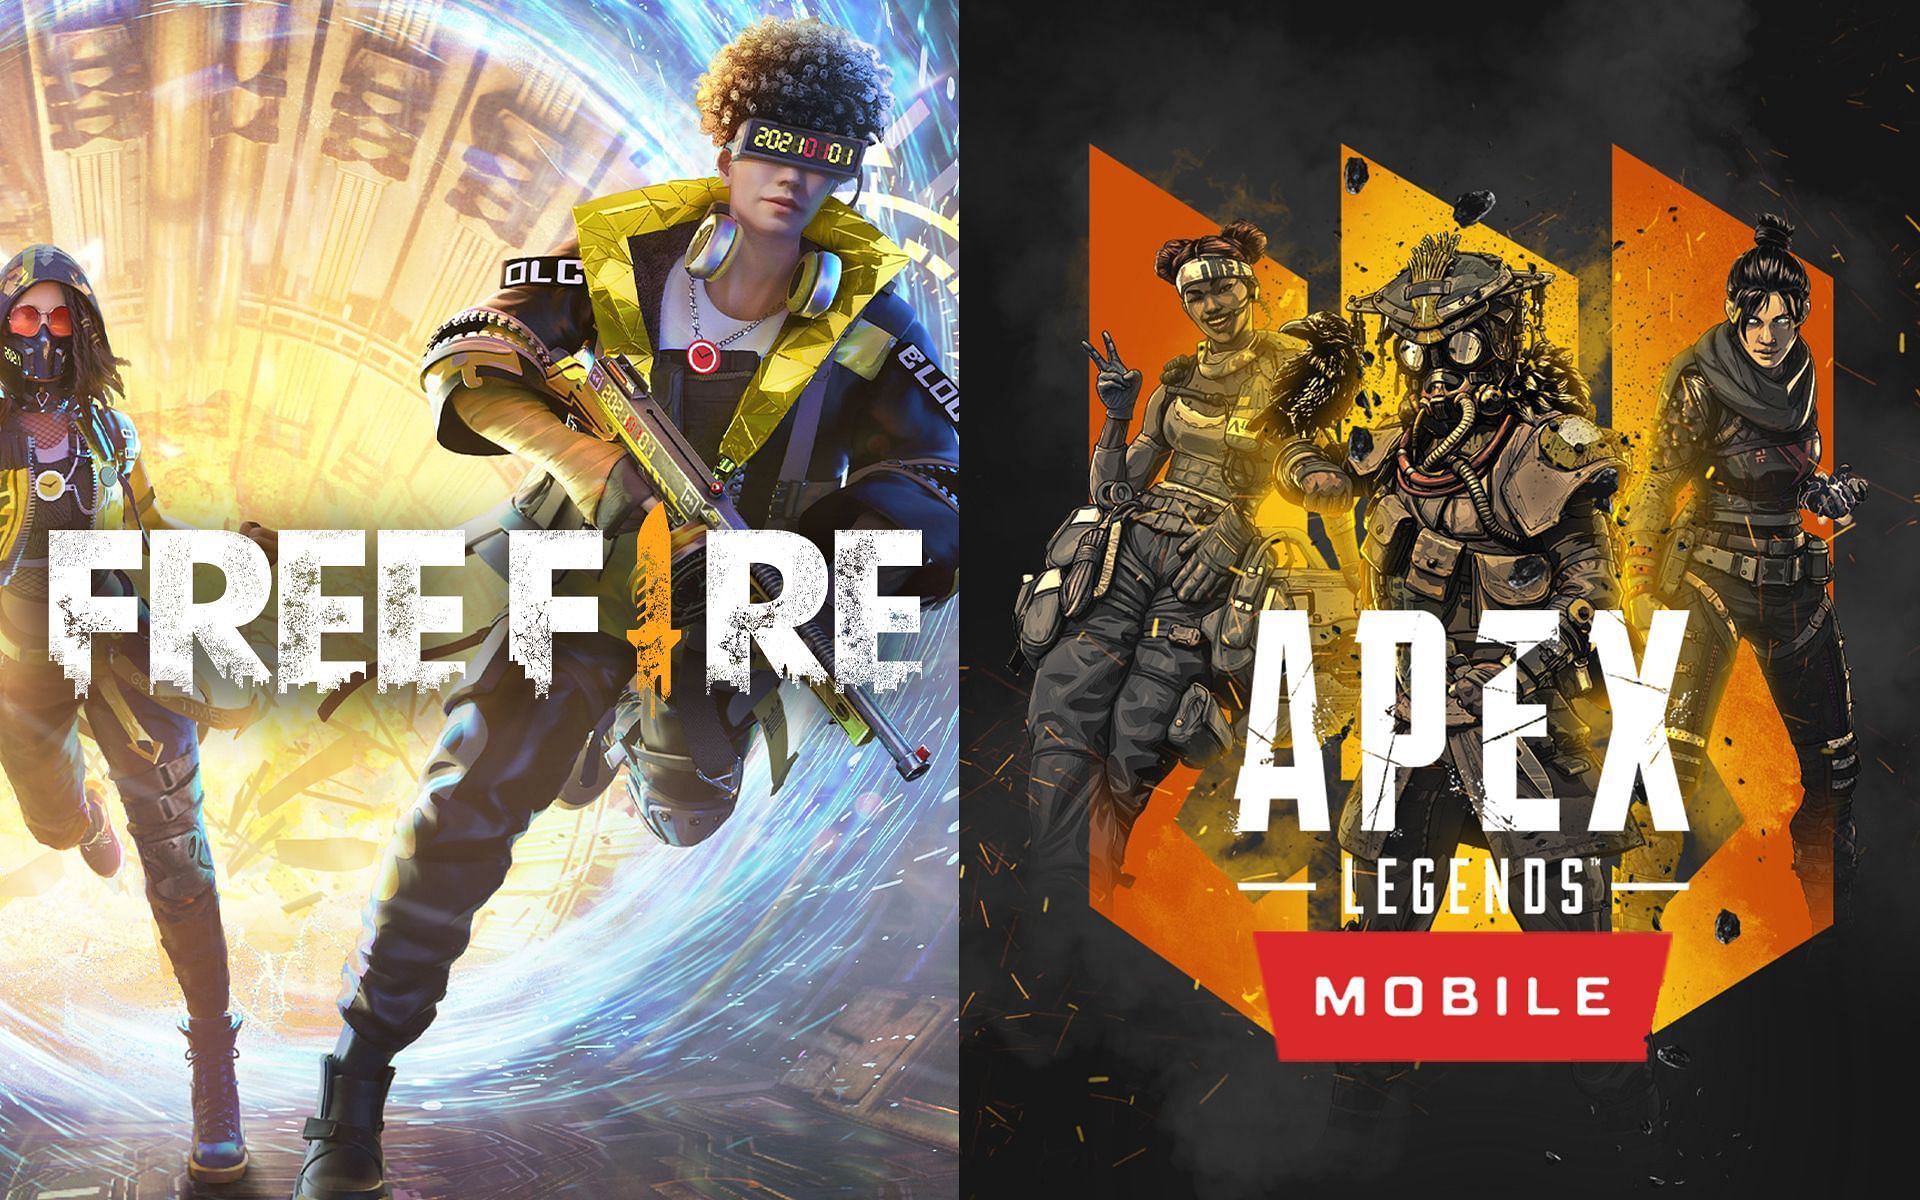 Should Apex Legends Mobile release now that Free Fire has been banned? (Image via Sportskeeda)